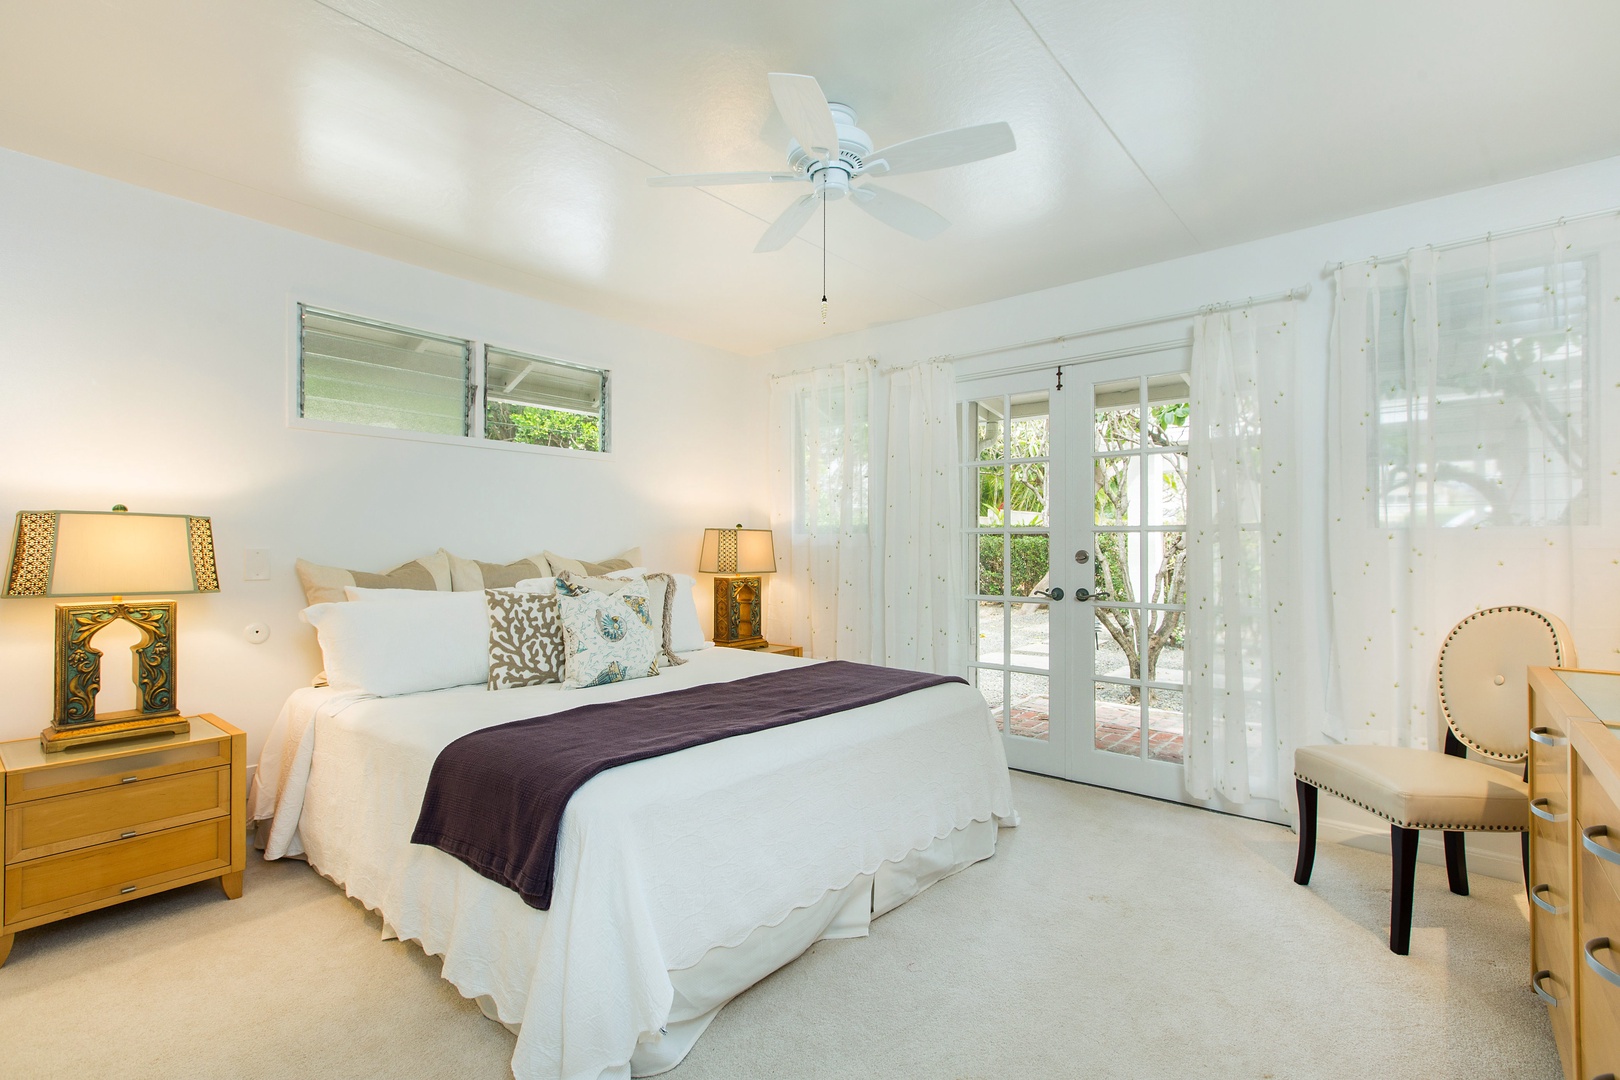 Honolulu Vacation Rentals, Hale Kai - Downstairs primary with ensuite bathroom. Window air conditioner.